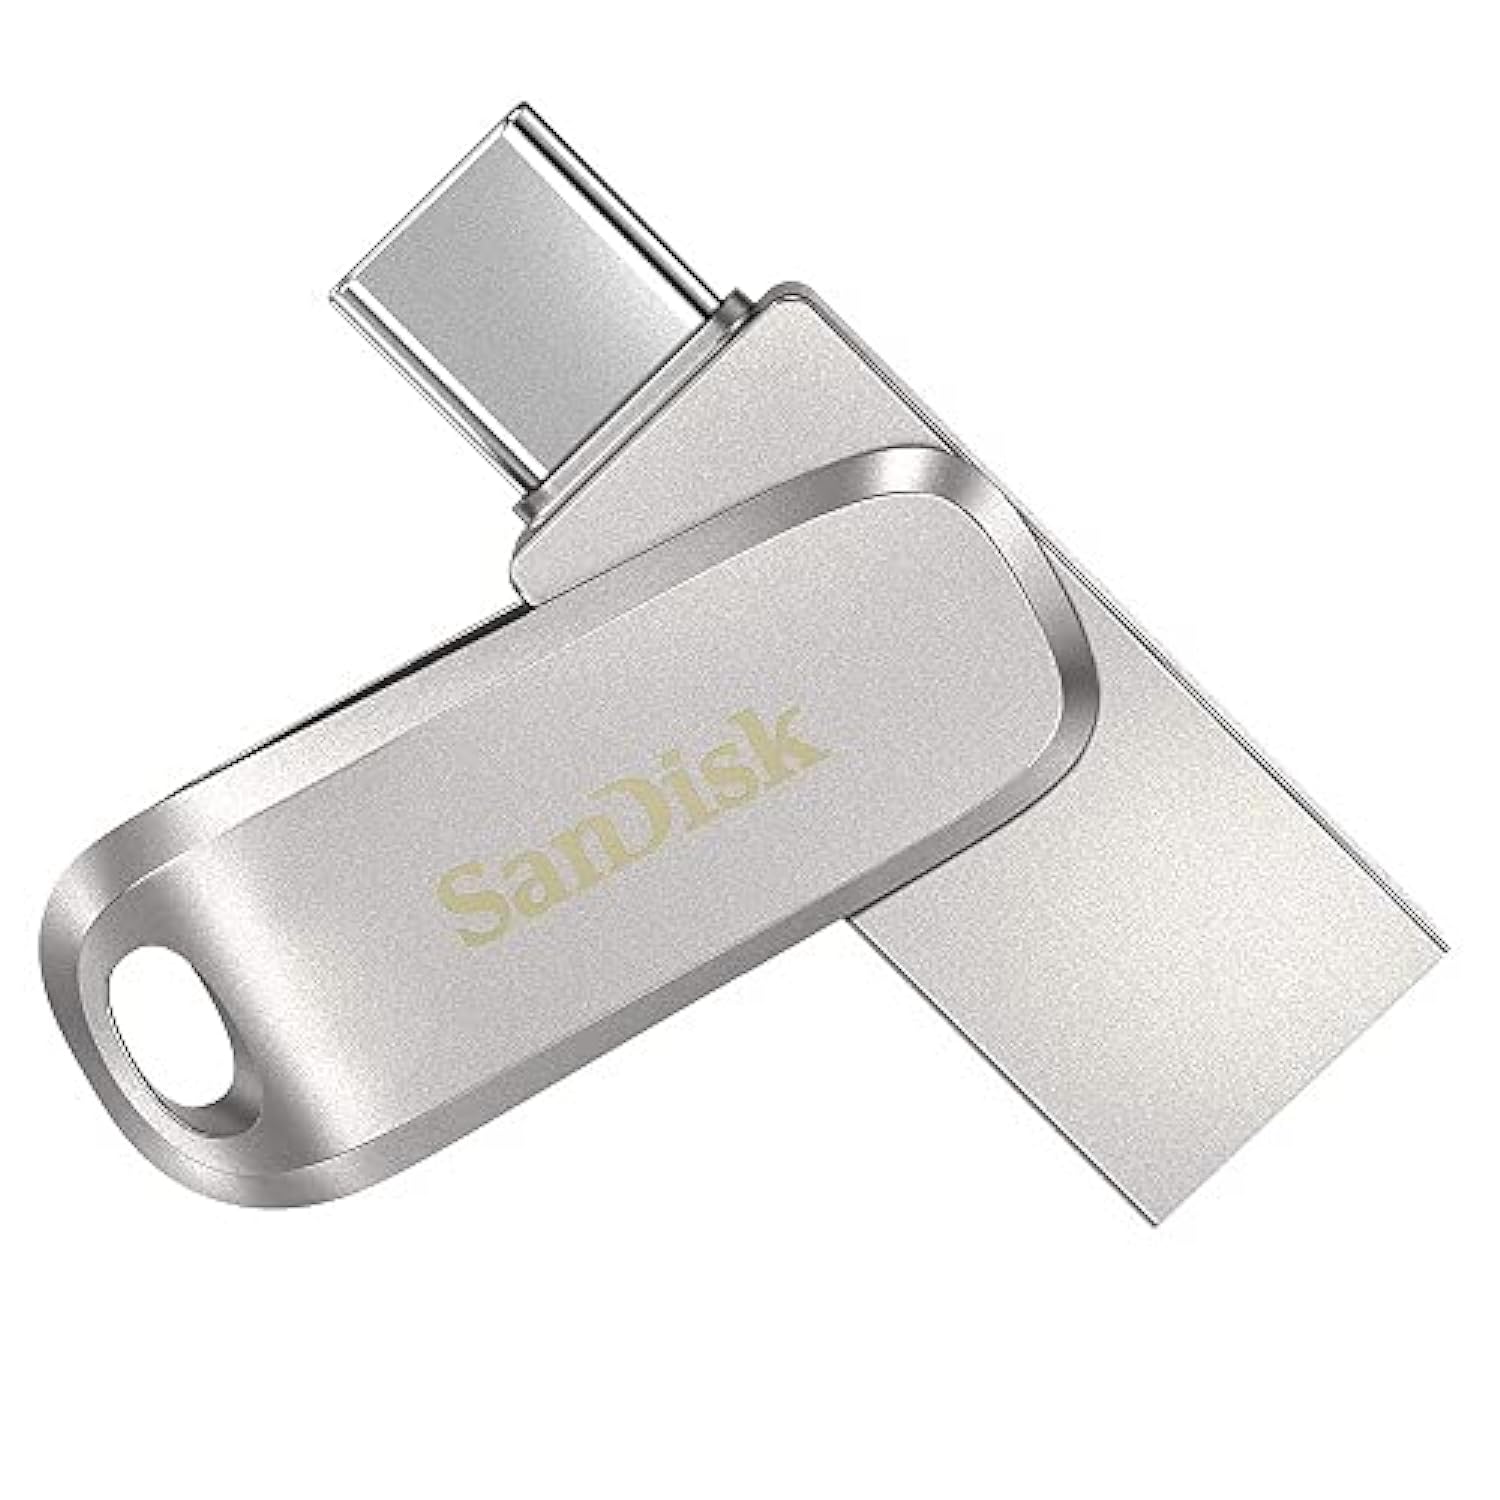 thinkstar Sandisk Ultra Dual Drive Luxe Usb Type-C 64Gb Flash Drive For Microsoft Lenovo Yoga, Surface Pro 7, Galaxy Book Pro 2-In…